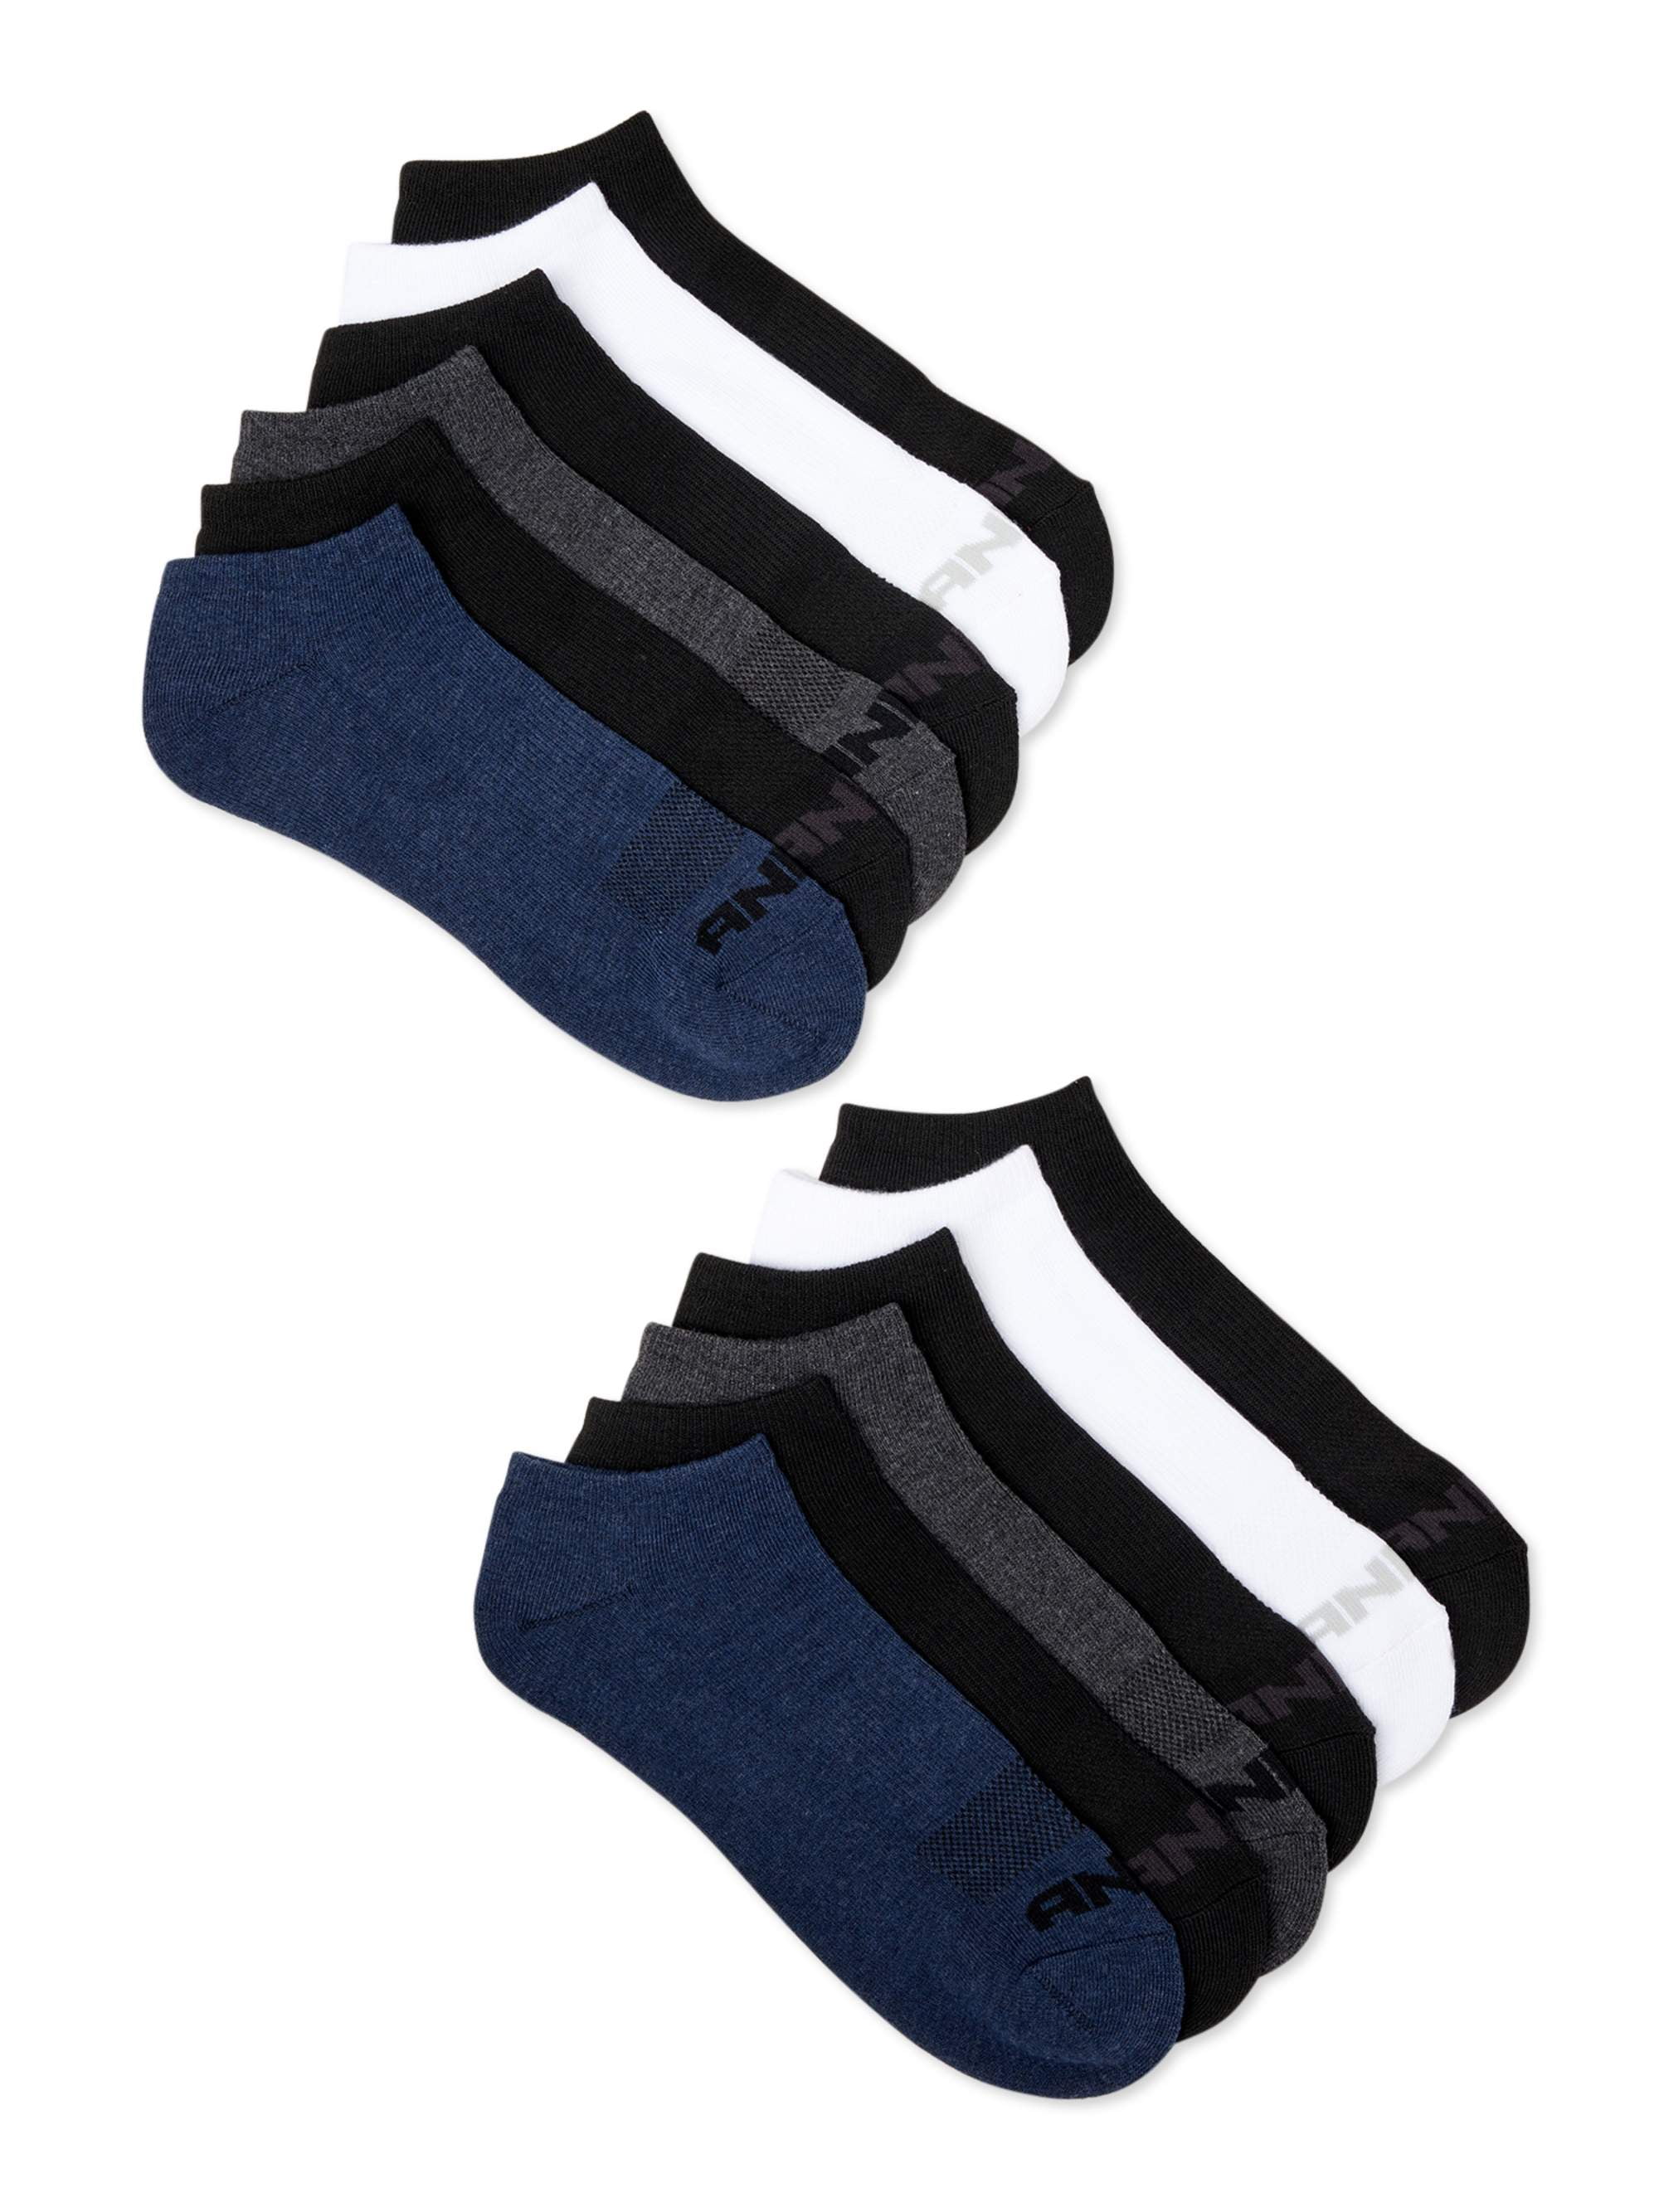 AND1 Men's Cushion Low Cut Sock, 12 Pack